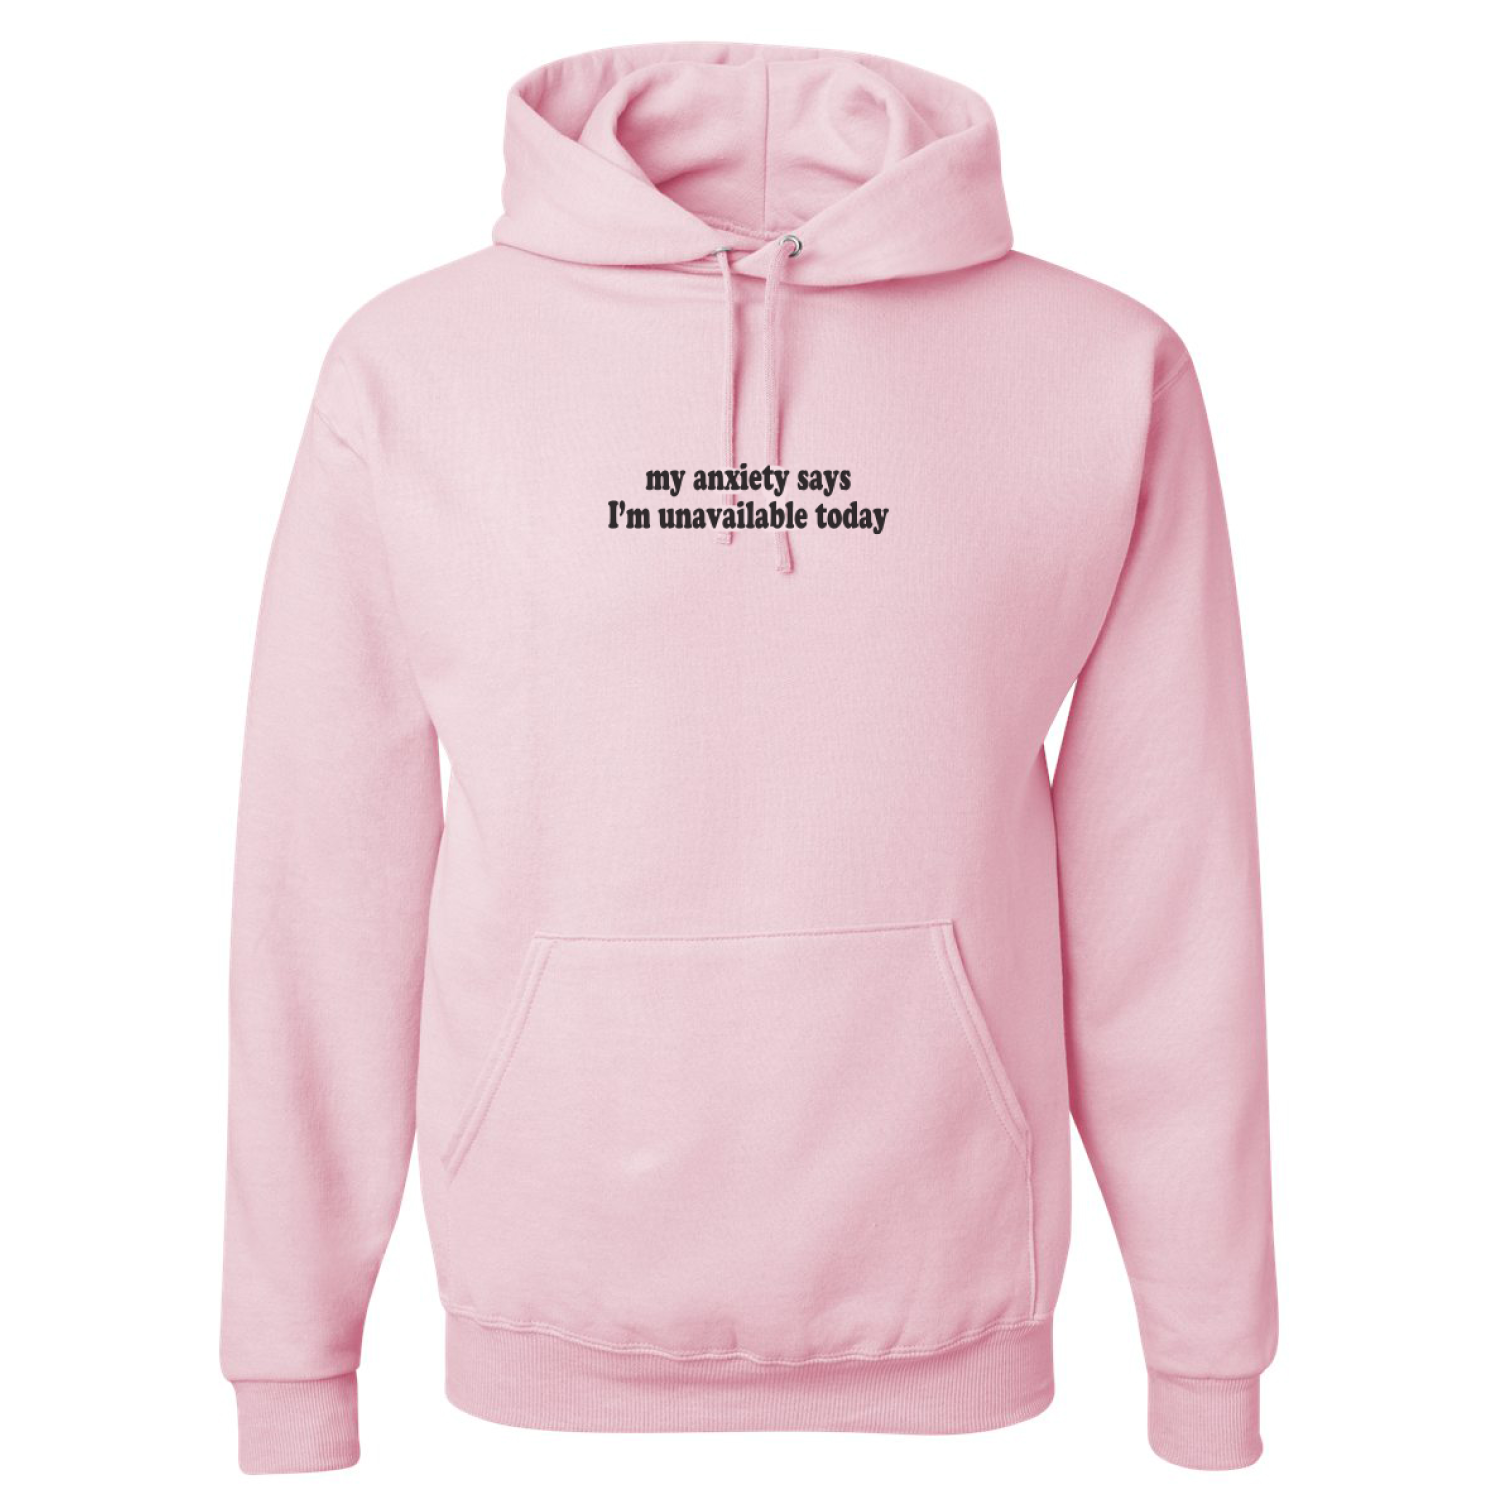 My Anxiety Says I'm Unavailable Today - Unisex Hoodie